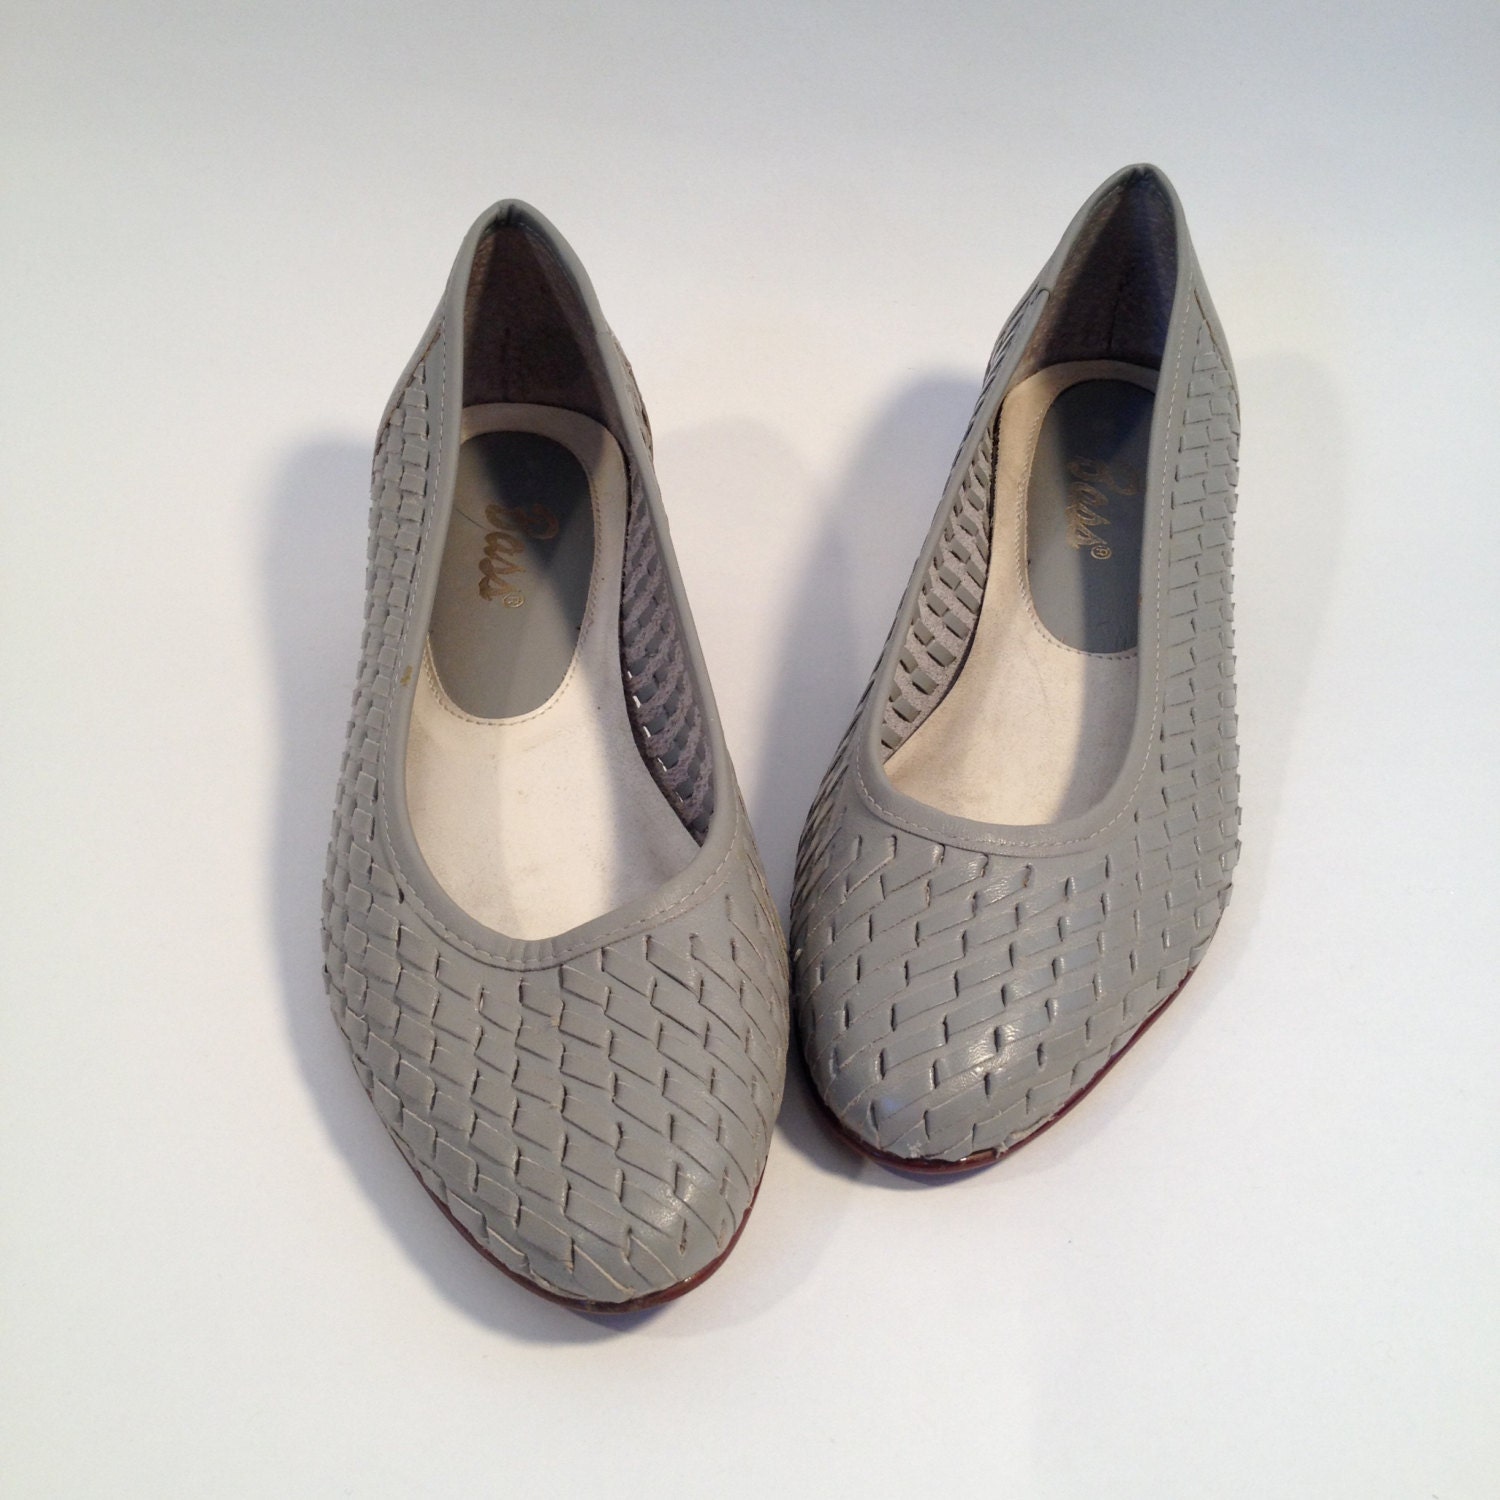 Vintage 1980s Gray Flats / Bass Shoes Woven by vintspiration